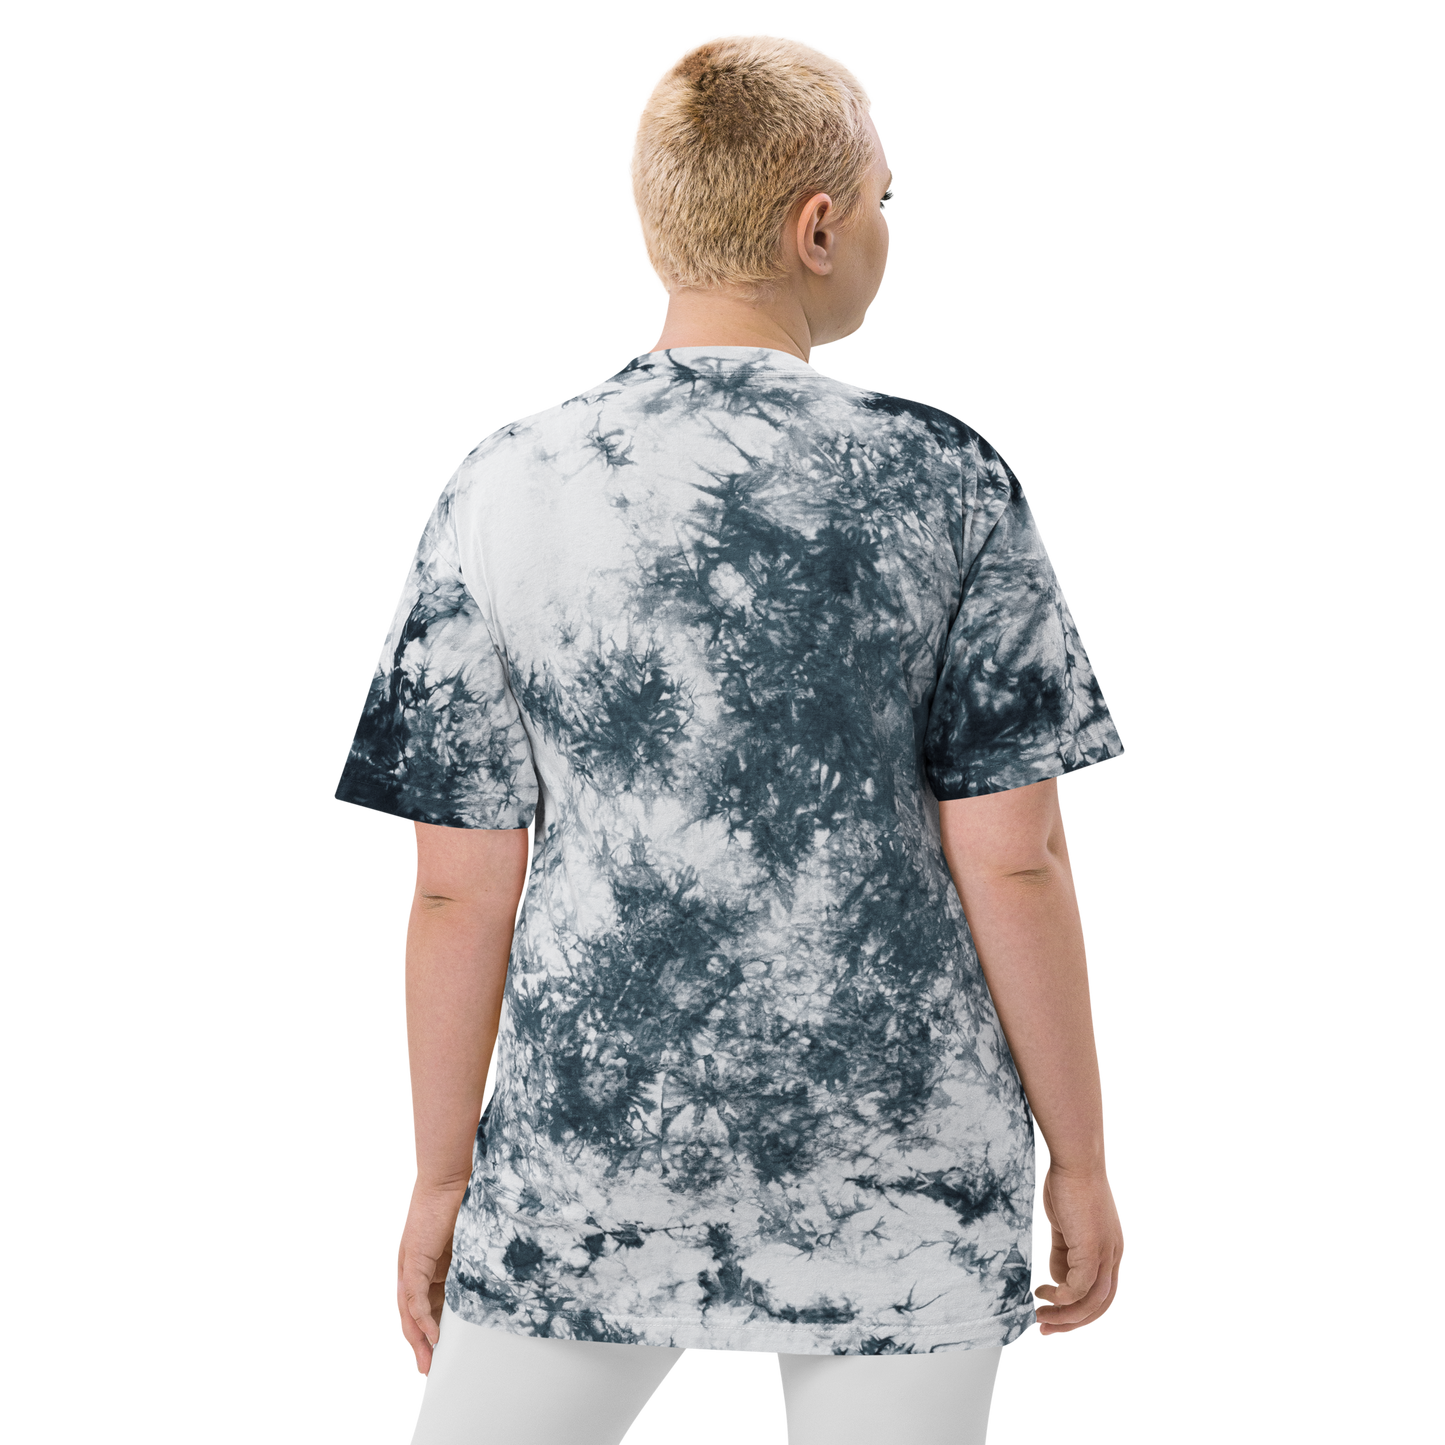 Crossed-X Oversized Tie-Dye T-Shirt • YVR Vancouver • YHM Designs - Image 17